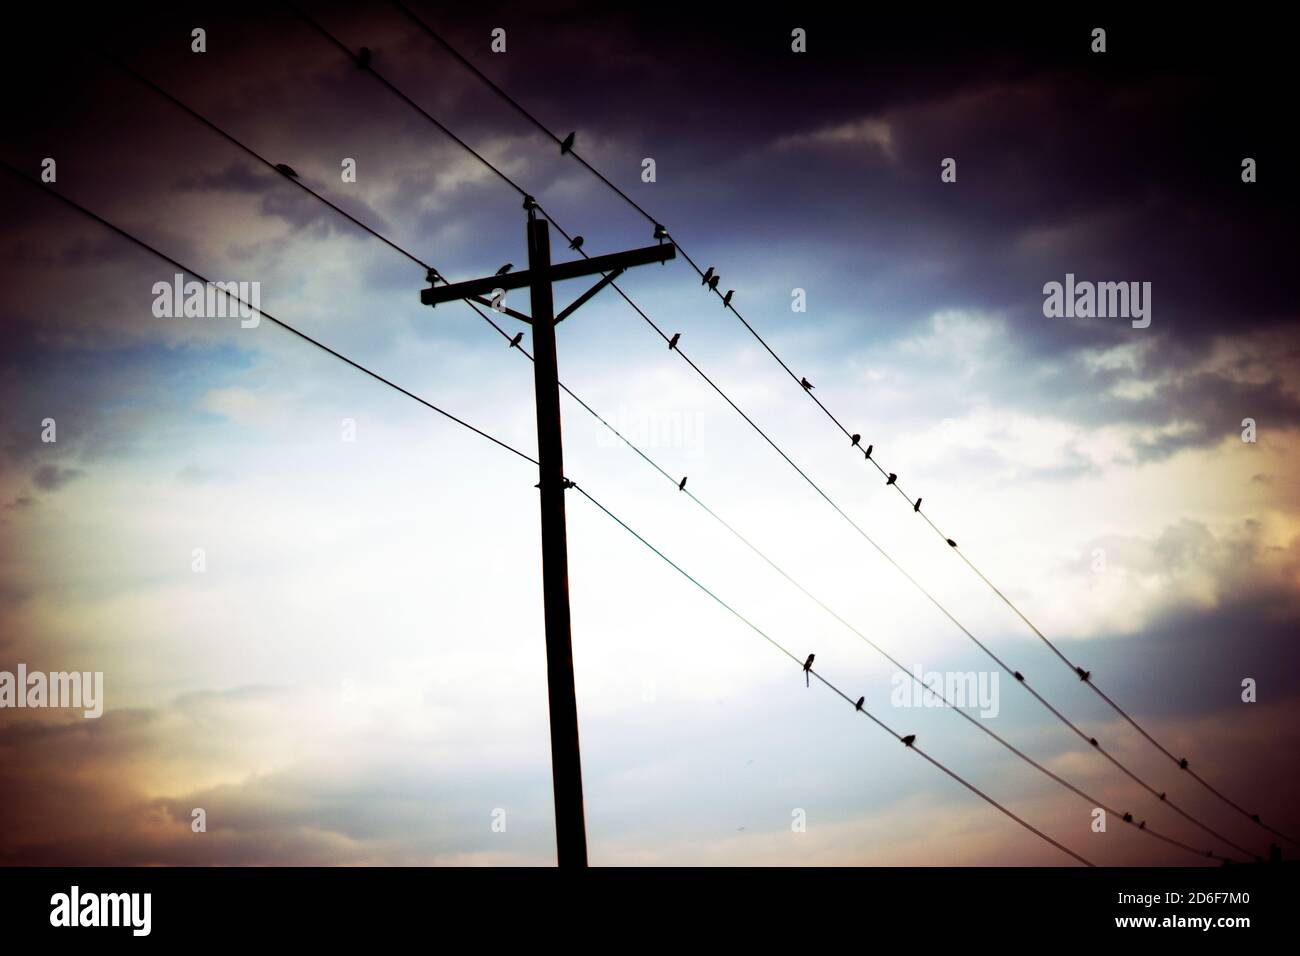 Birds Perched on Power Lines, Atmospheric Mood Stock Photo